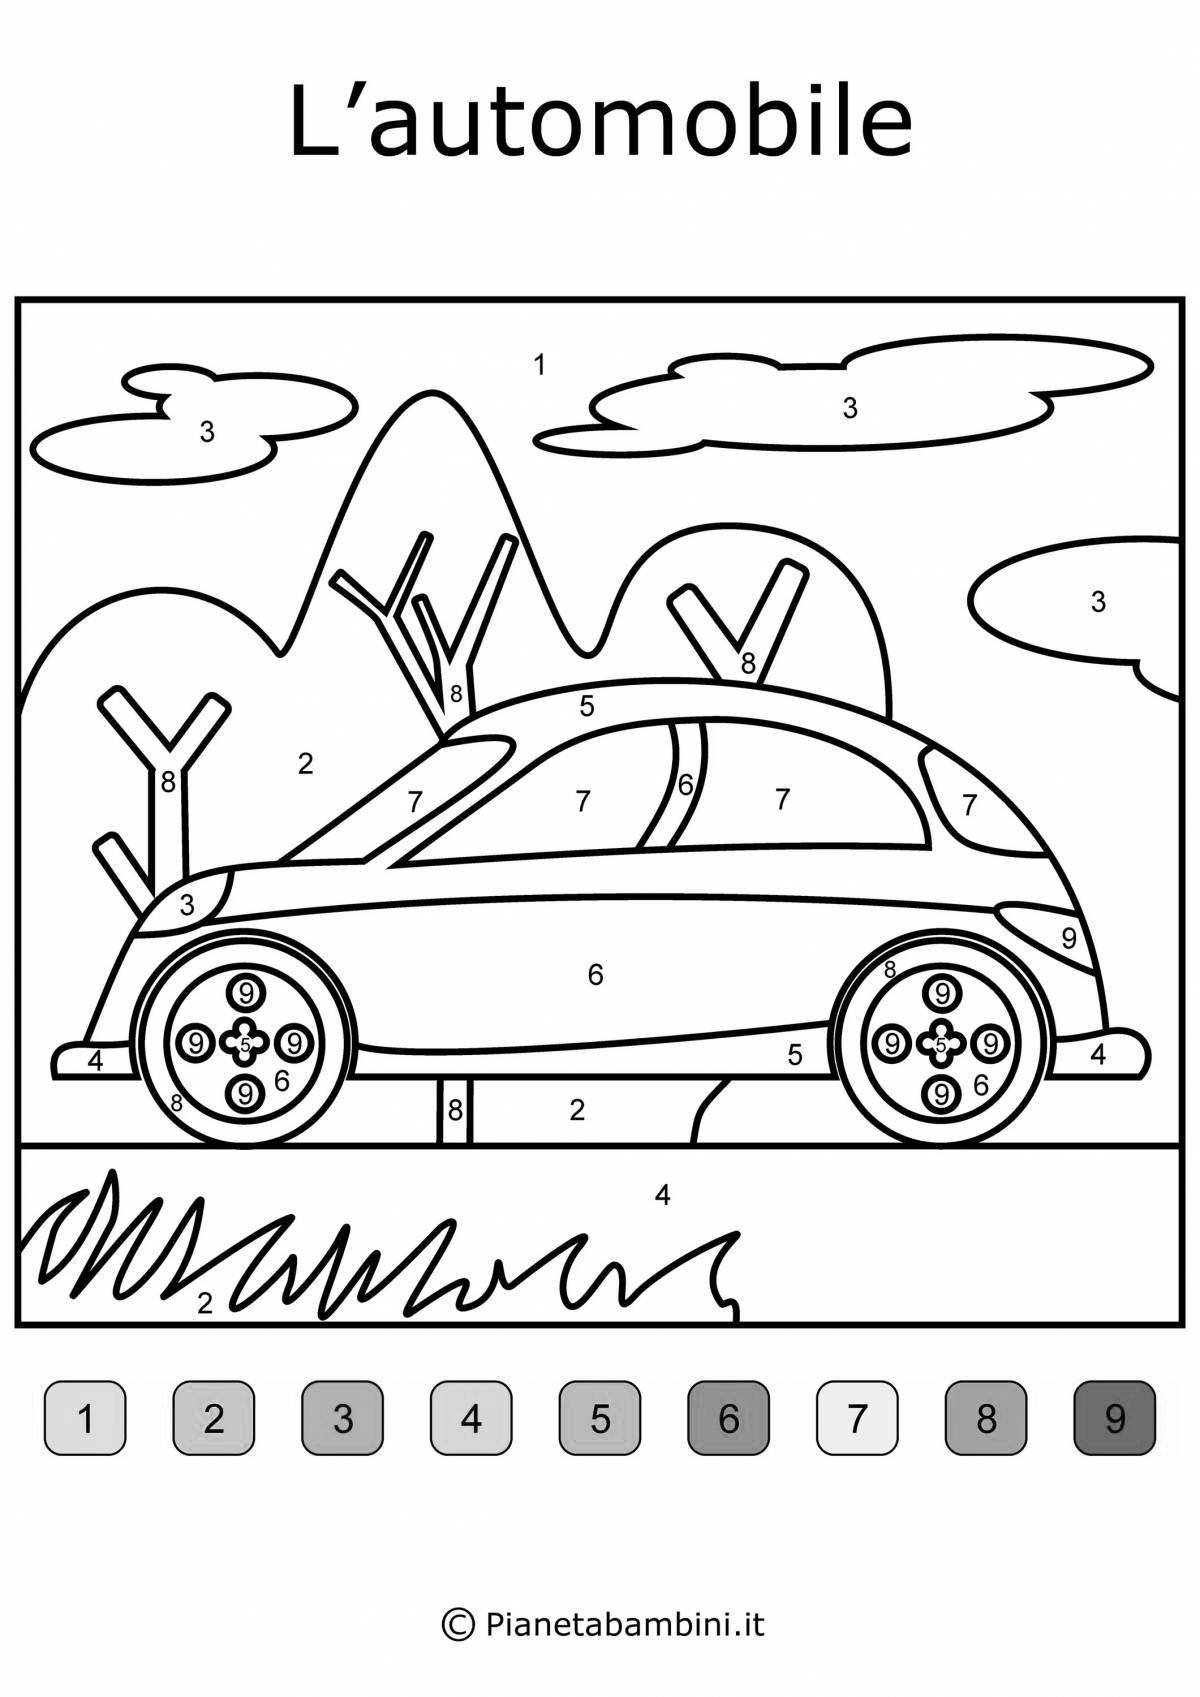 Large car coloring by numbers